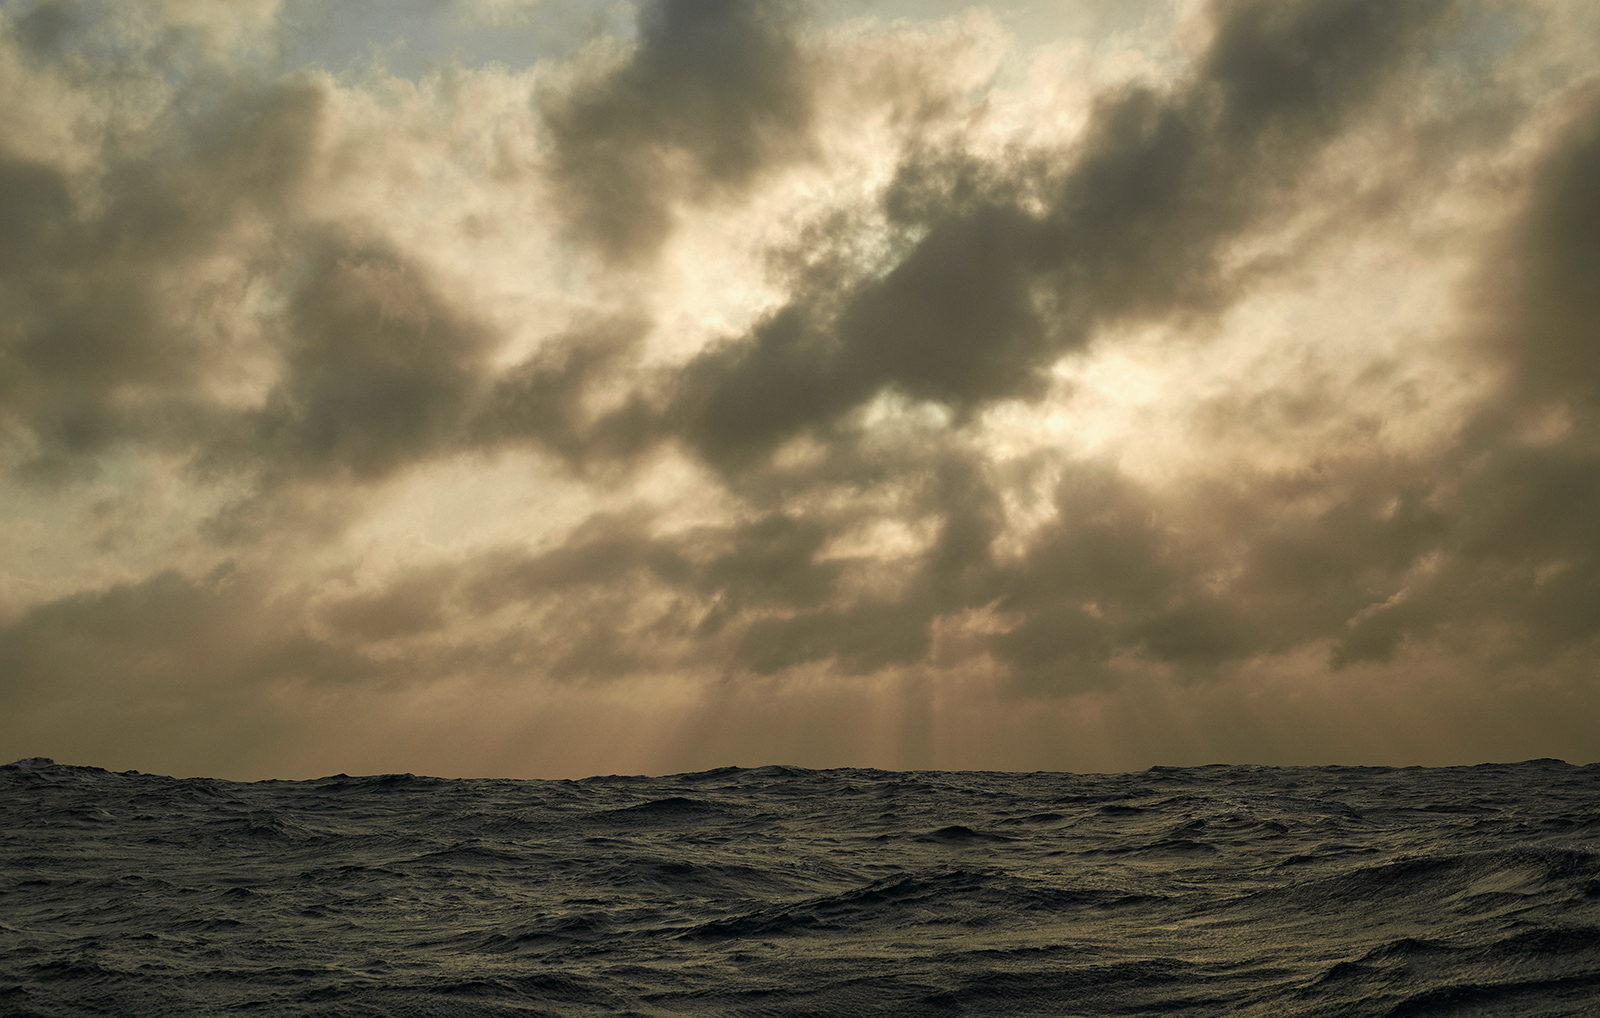 Sharp Sunrise is a photograph by Justus Järnefelt taken while sailing from Horta to Brest i May 2022. The sun is forcing itself through hazy clouds